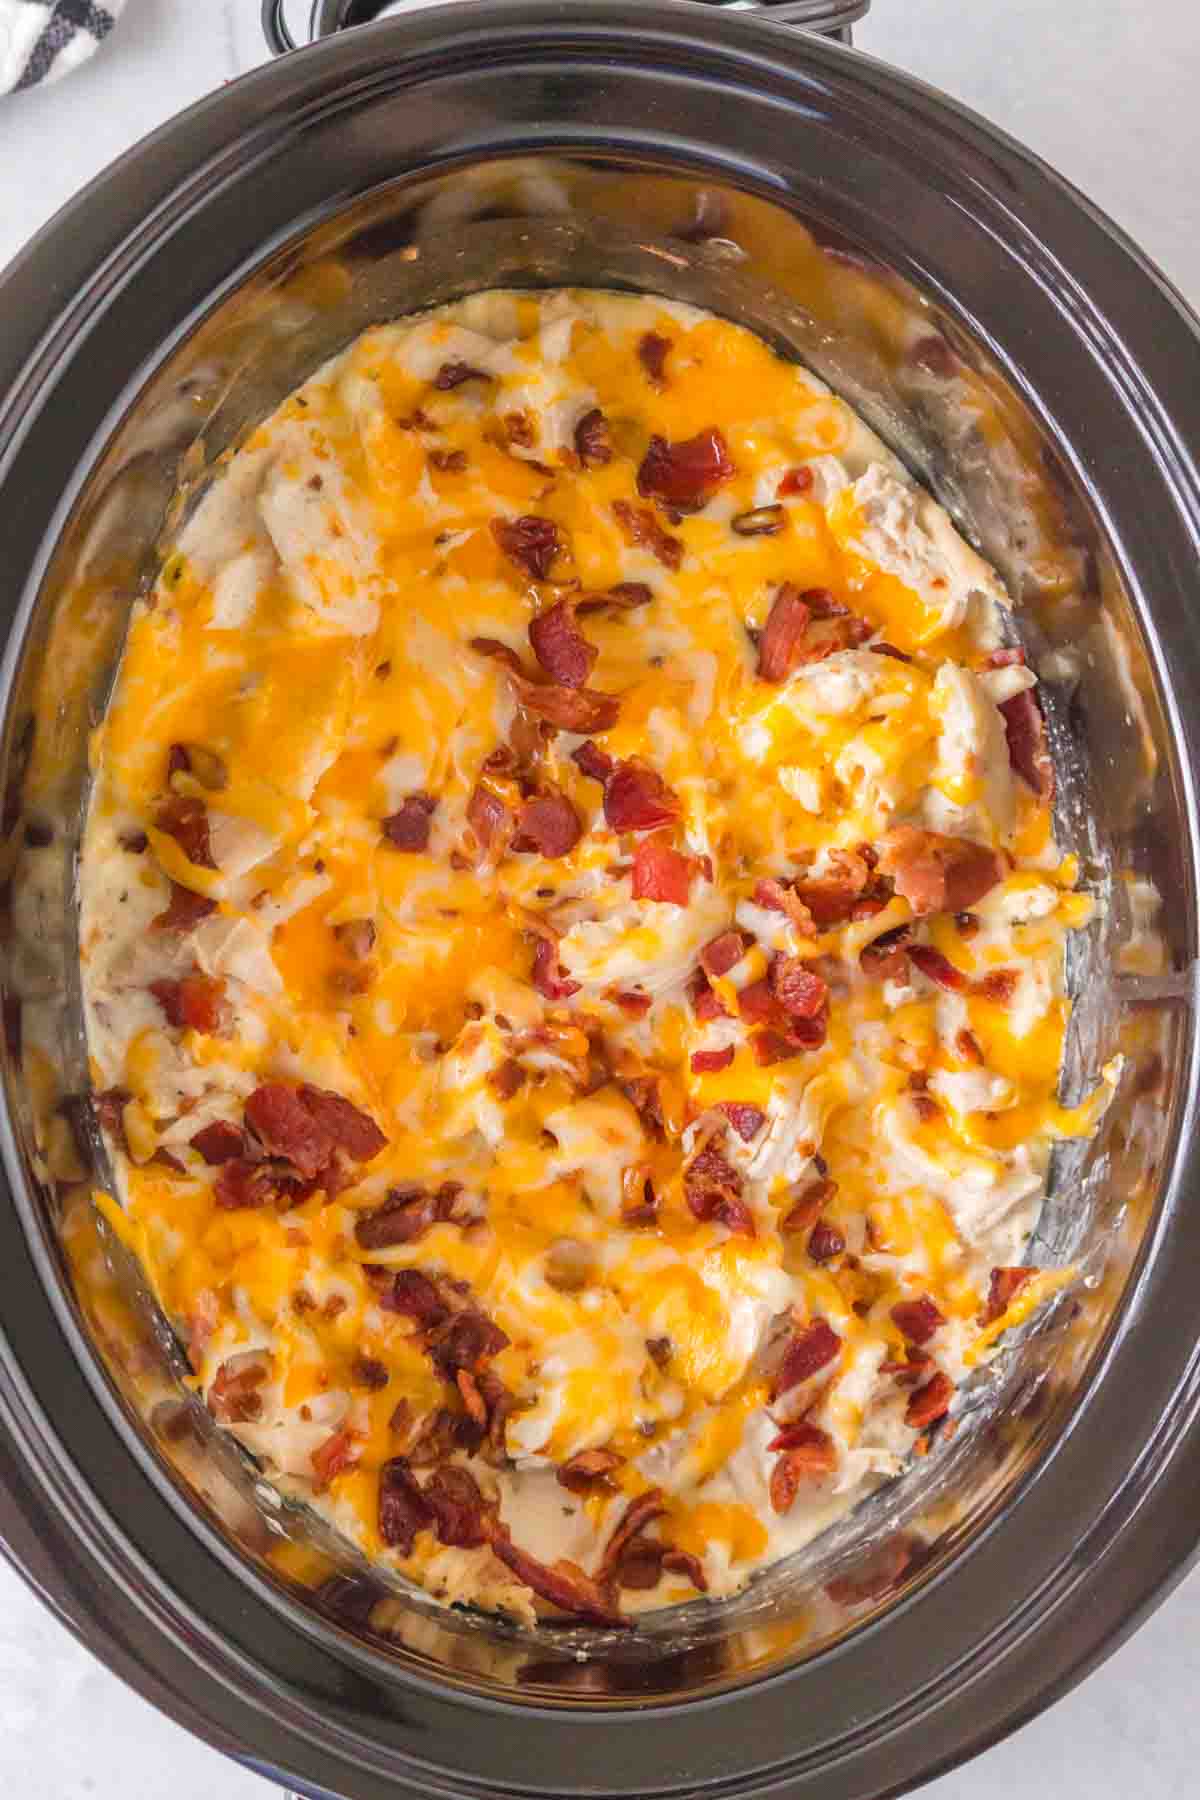 slow cooker with seasoned crack chicken inside shredded and sauced with melted cheese